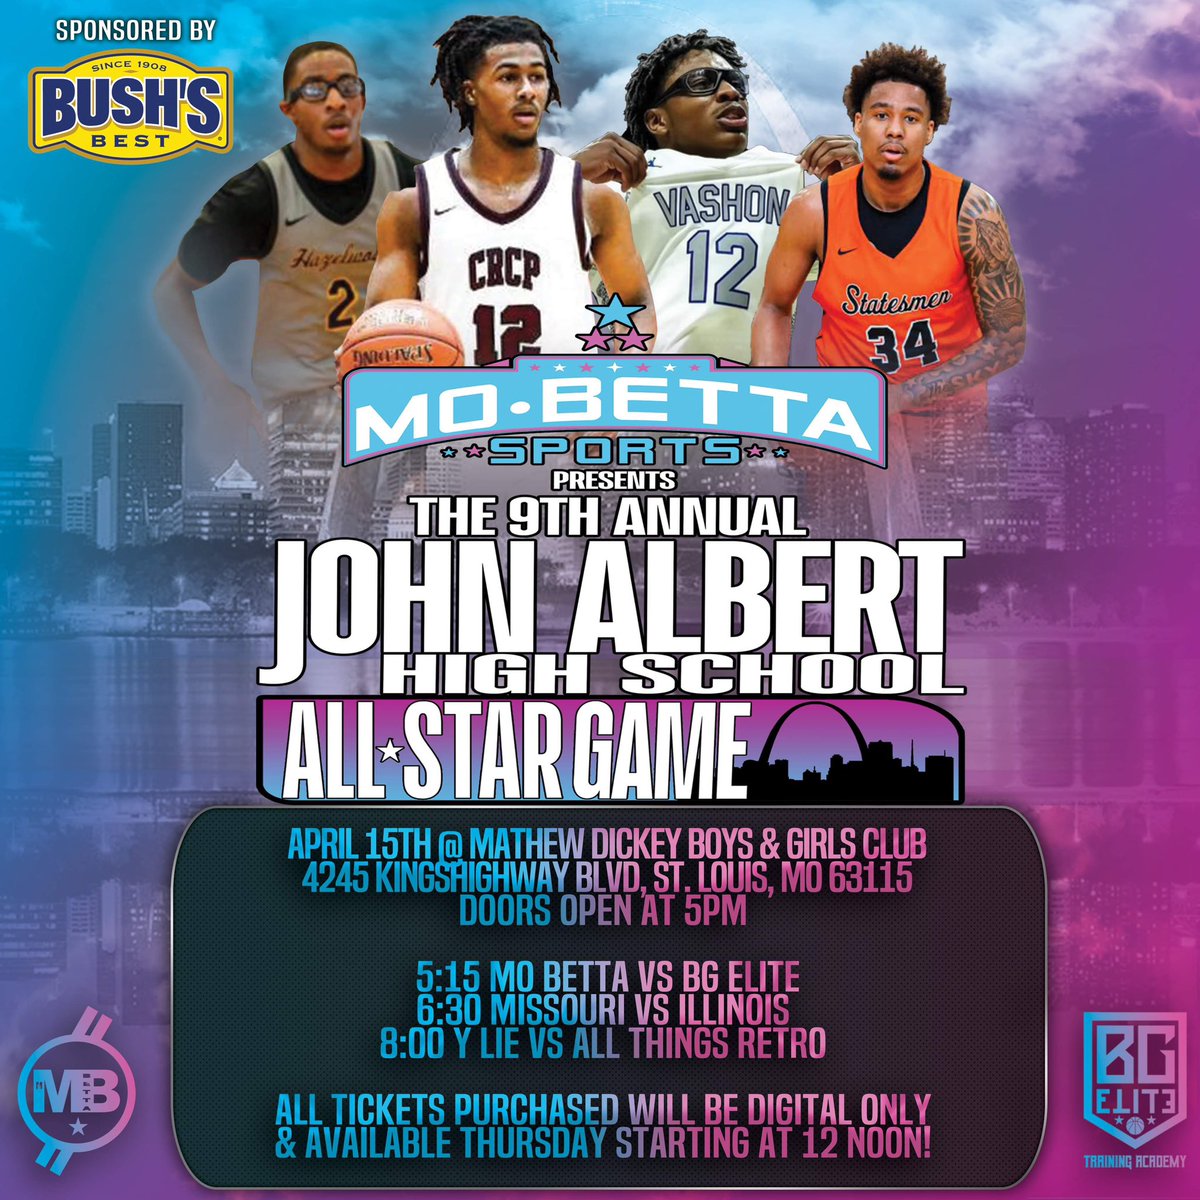 Come on out today to support the Mo Betta Sports Presents: 9th Annual John Albert High School Allstar Game! Avoid the long lines tonight! We are doing digital tickets only so please get your tickets now by clicking the link! mobettasport.hometownticketing.com/embed/event/1?…